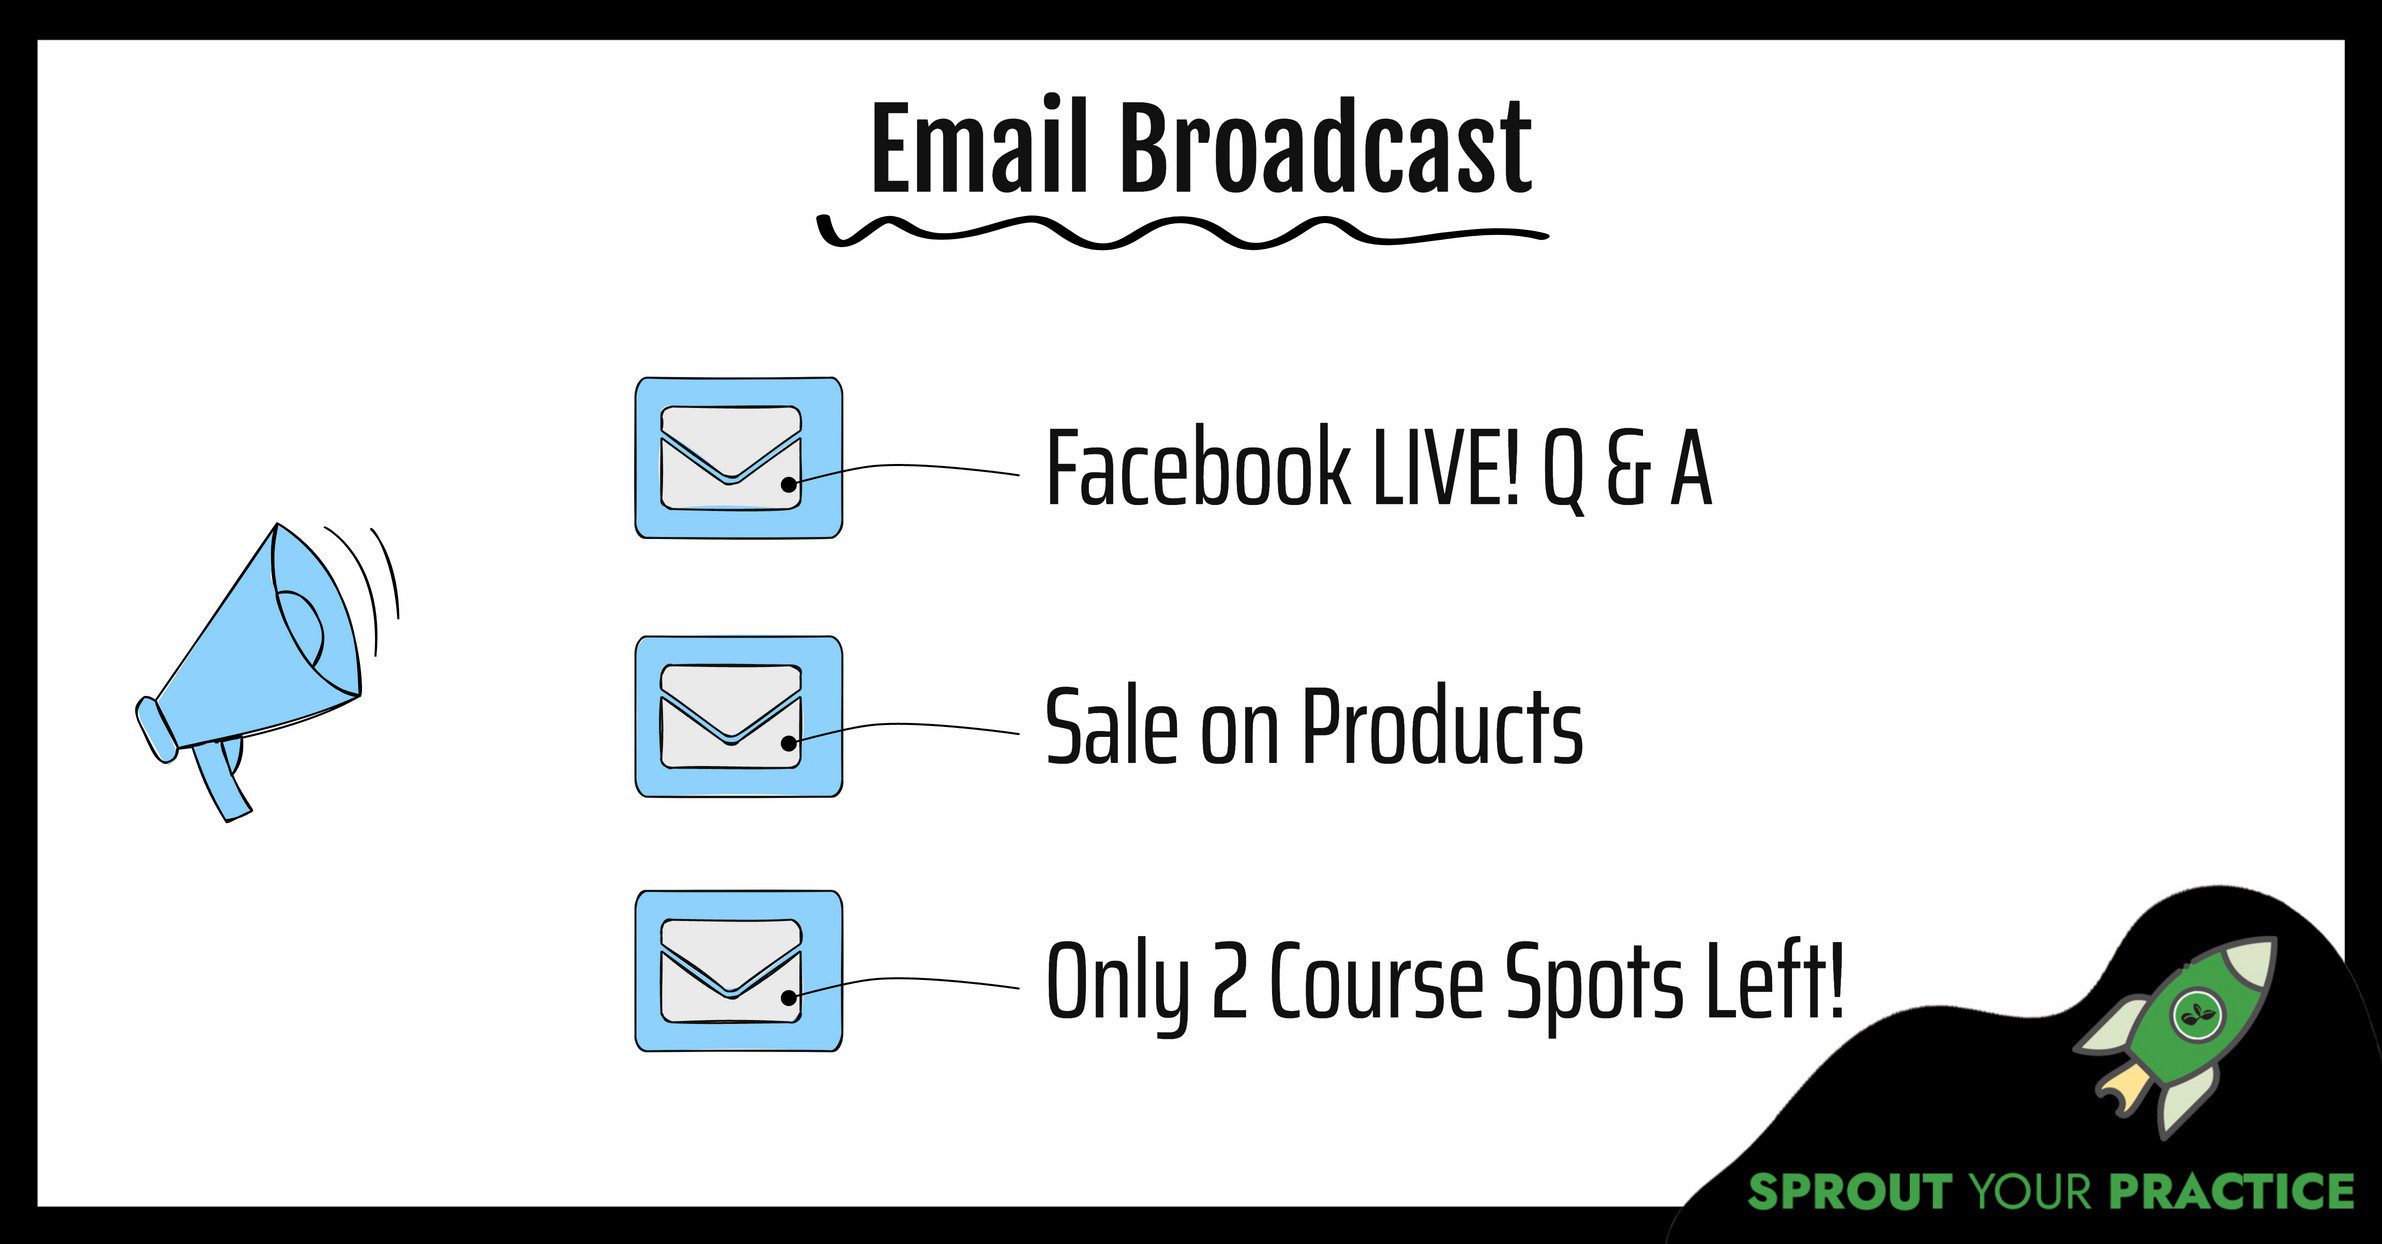 Graphic showing three ways to use email broadcast